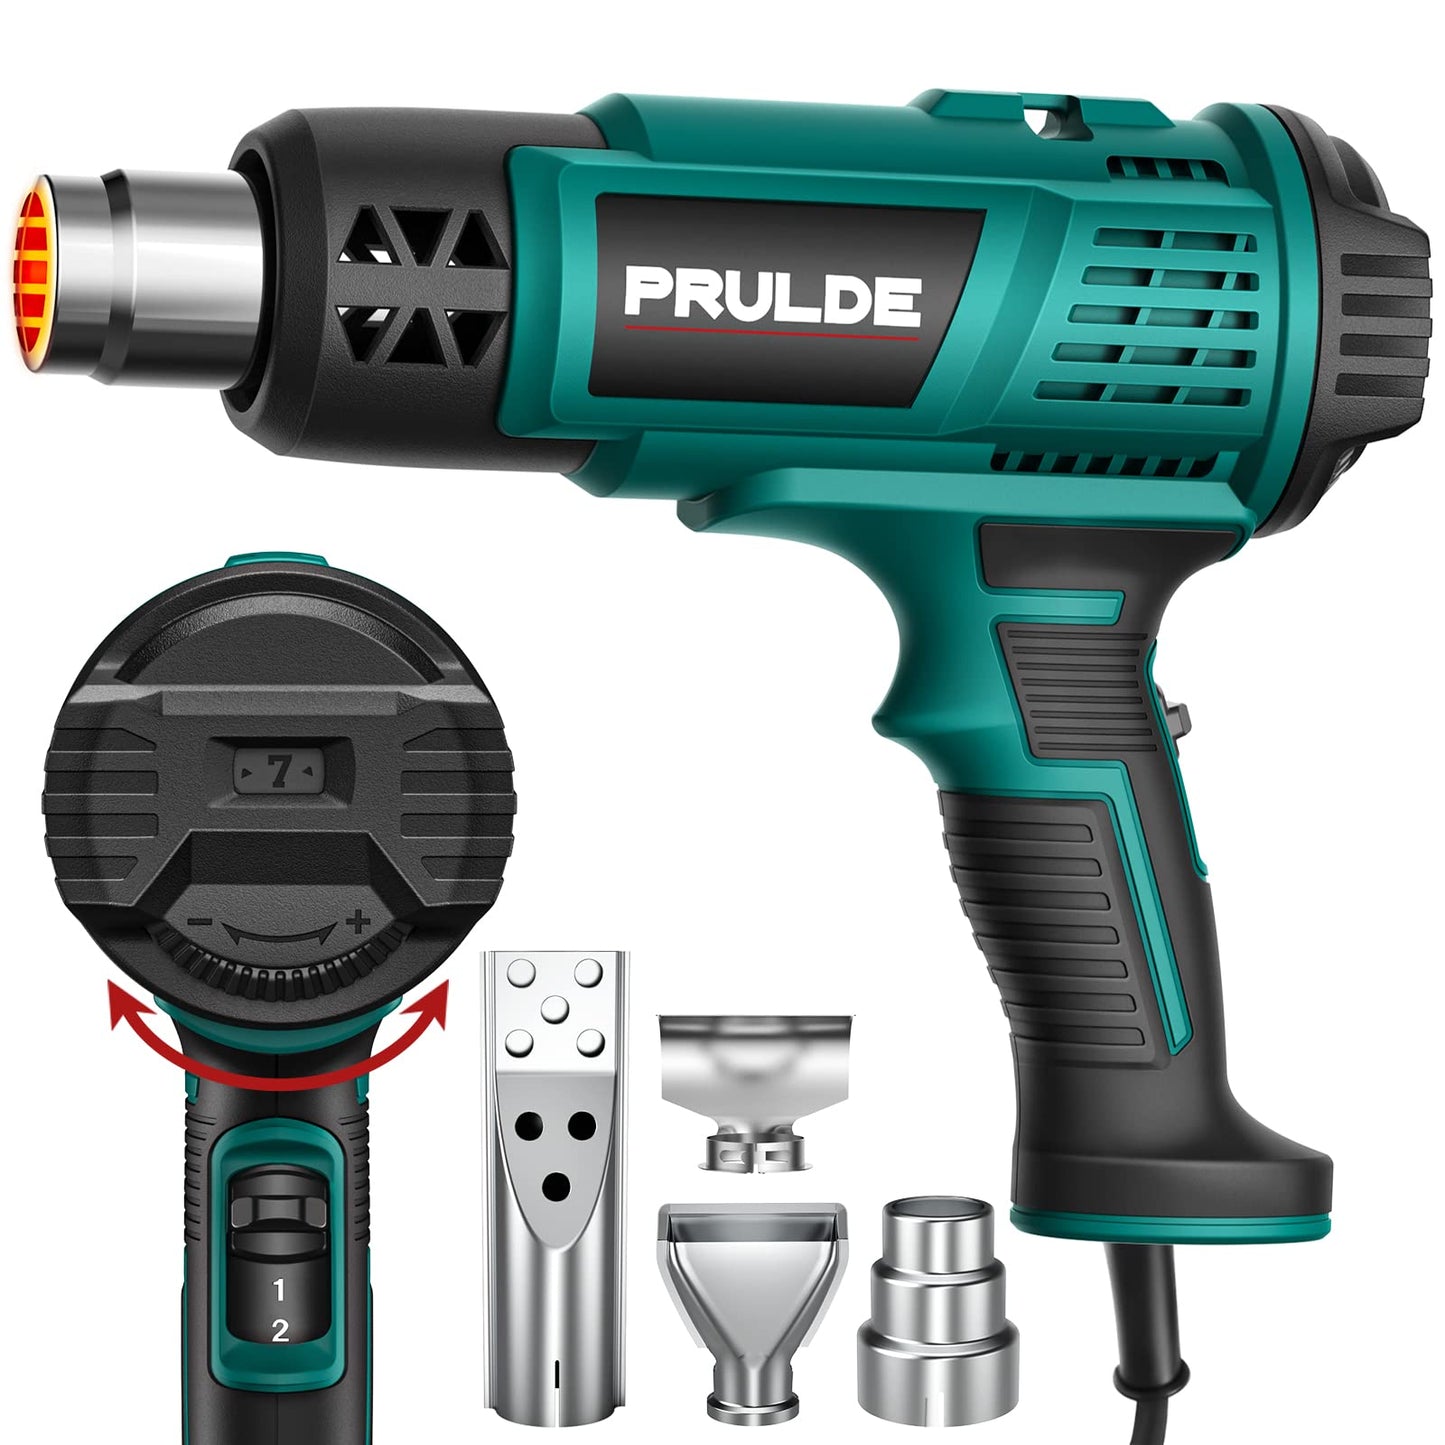 Heat Gun, PRULDE Variable Temperature Settings 122℉~1202℉ Fast Heat Hot Air Gun with 6.56Ft UL Cord for Vinyl Wrap, Crafts, Shrink Tubing/Wrapping,